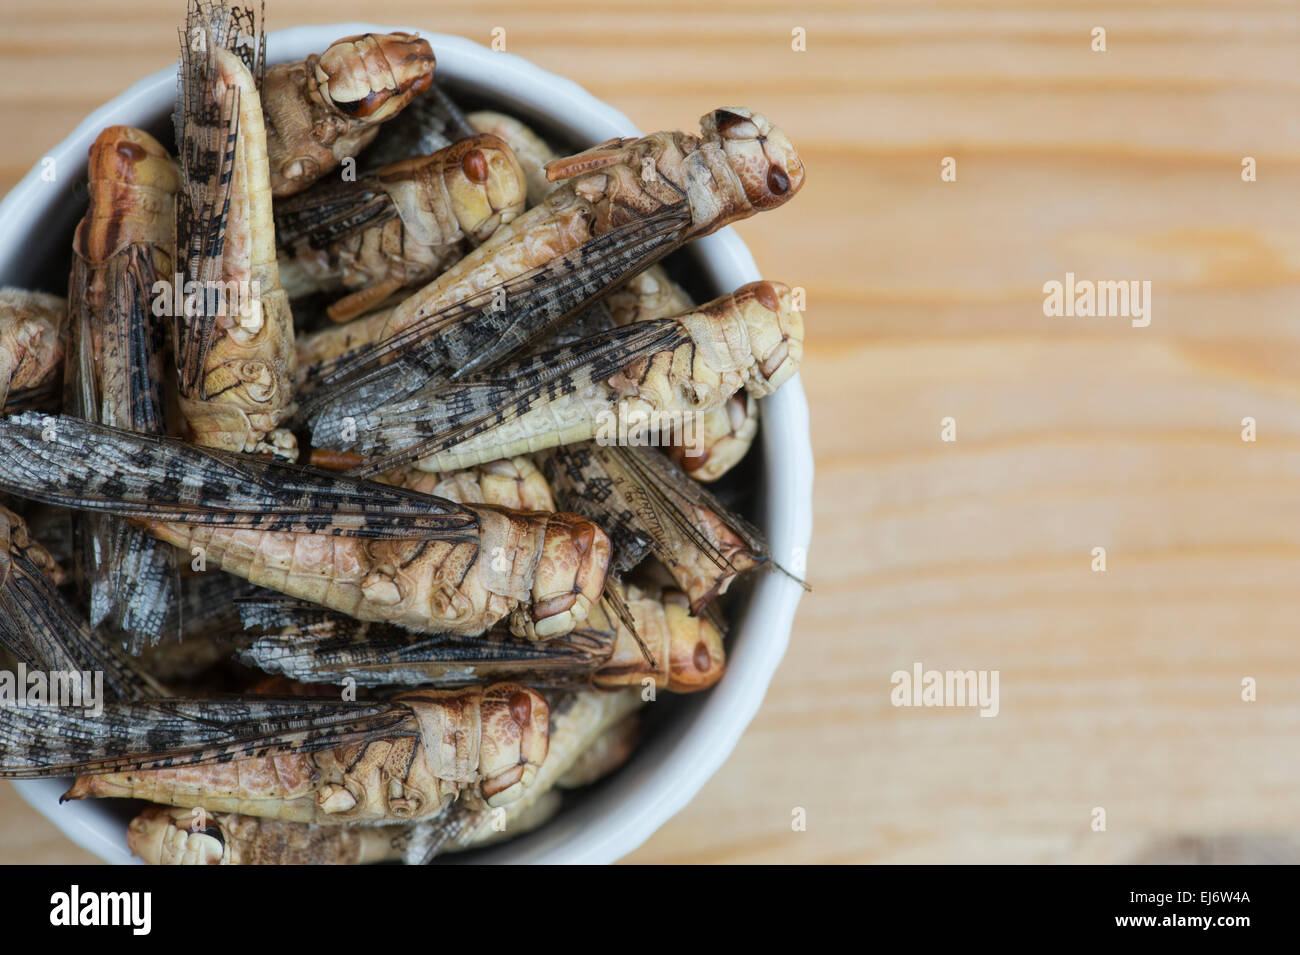 Edible insects. Grasshoppers in a bowl. Food of the future Stock Photo